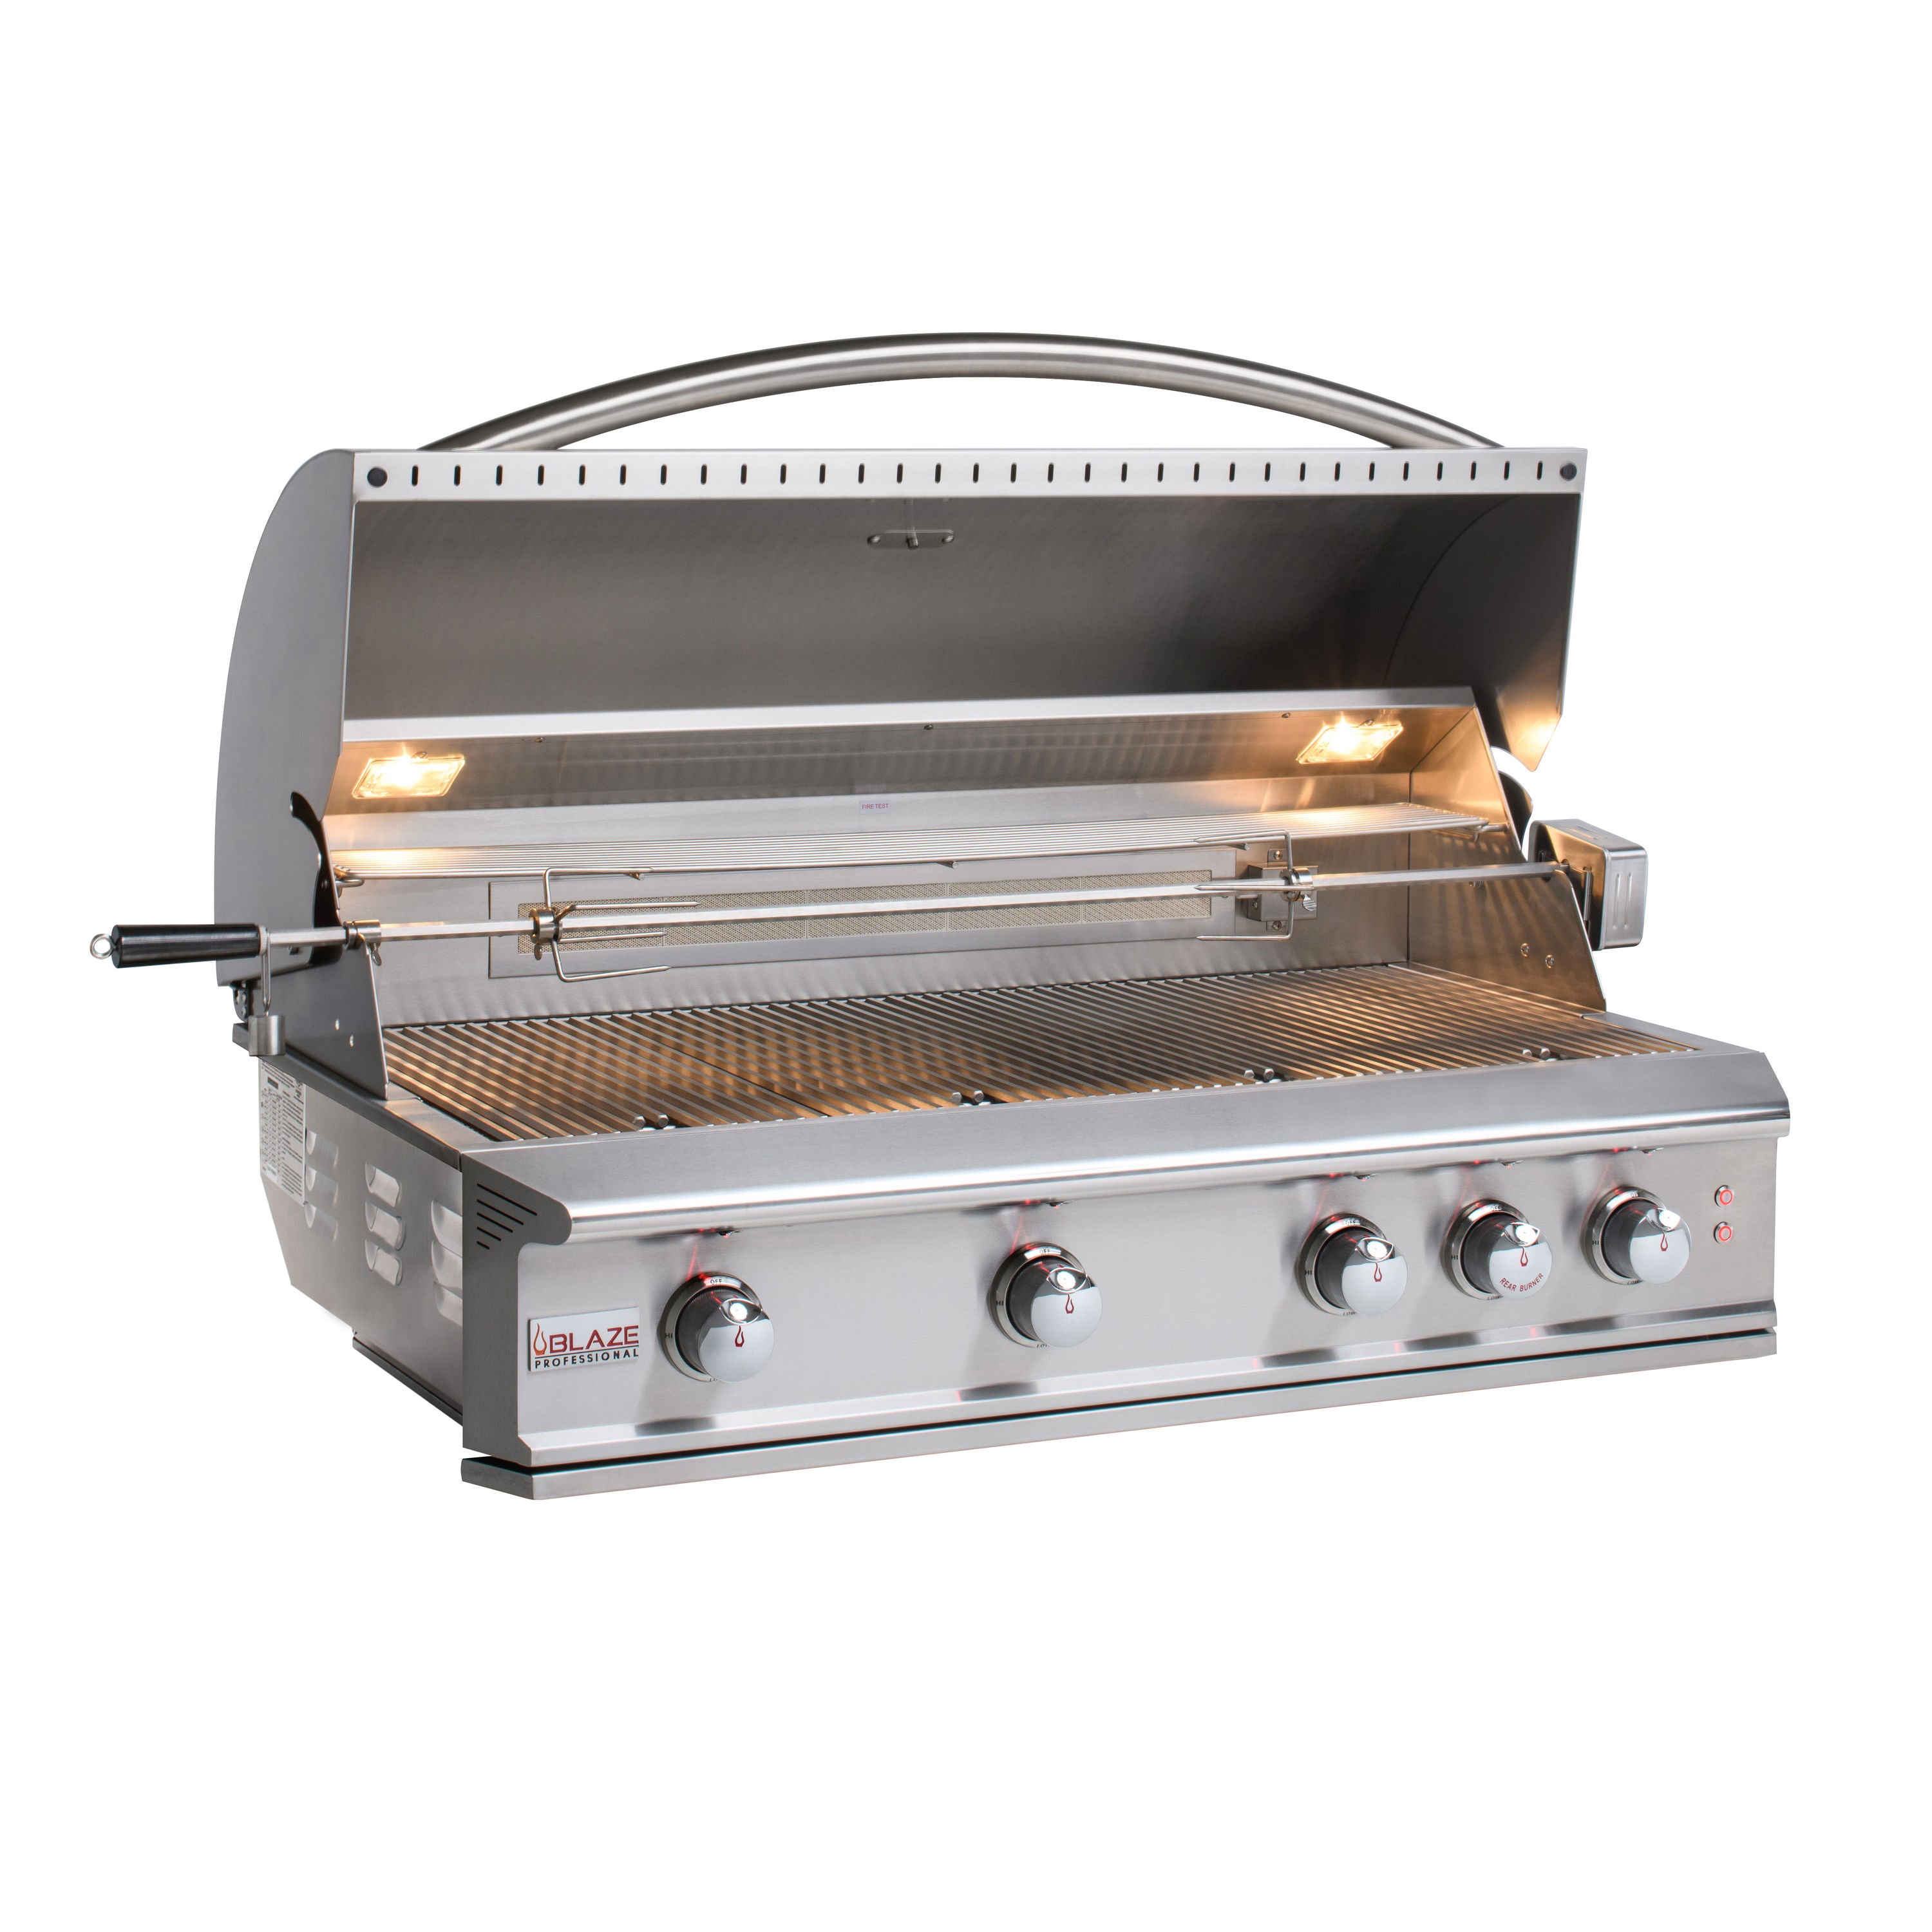 Blaze Professional LUX 44 inch 4-Burner Built-In Gas Grill with Rear Infrared Burner, BLZ-4PRO